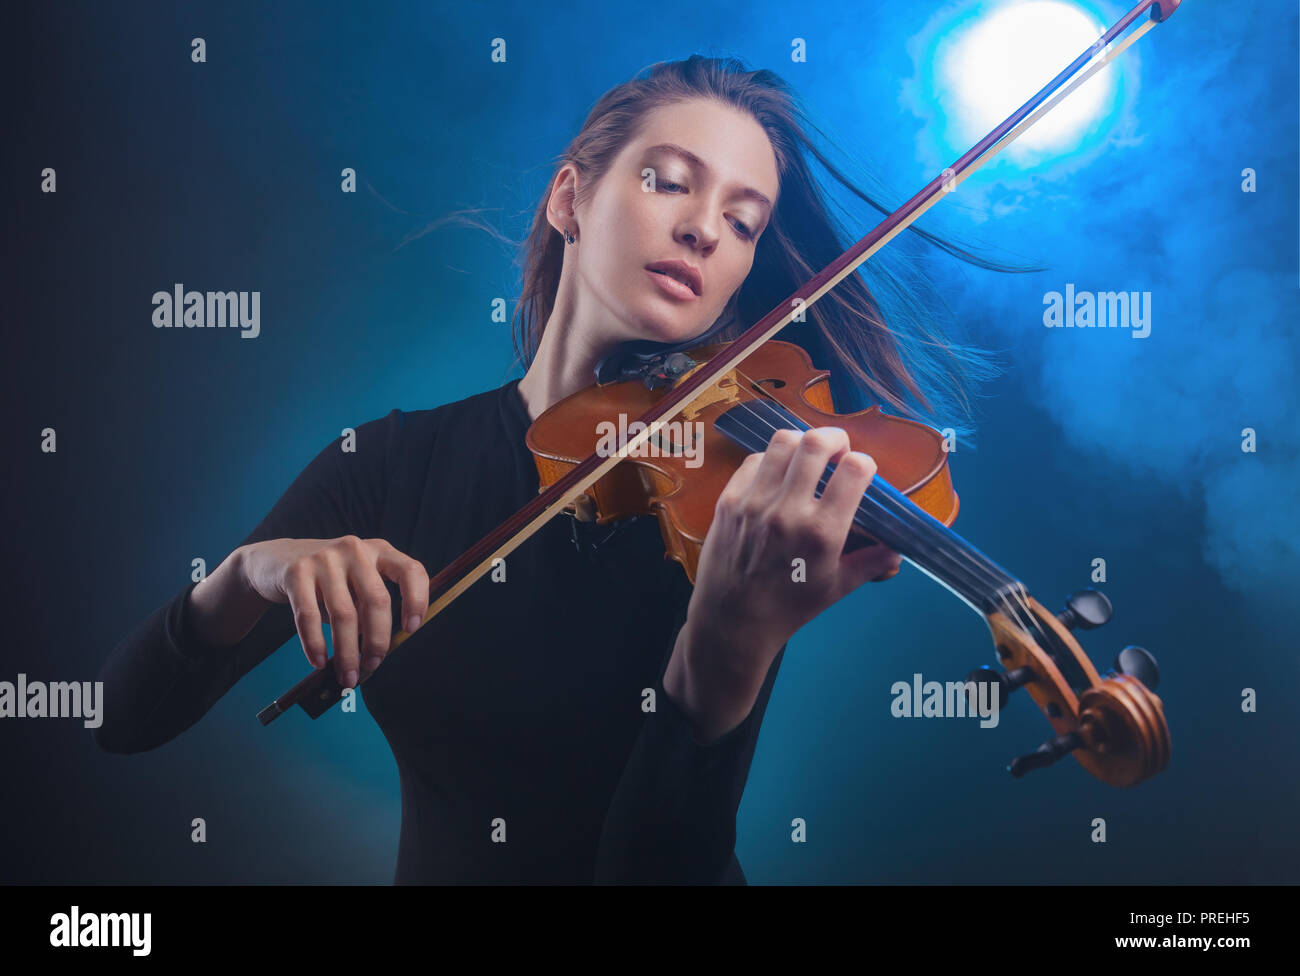 Beautiful young woman playing the violin on dark blue background. Fog in the background. Studio shot Stock Photo